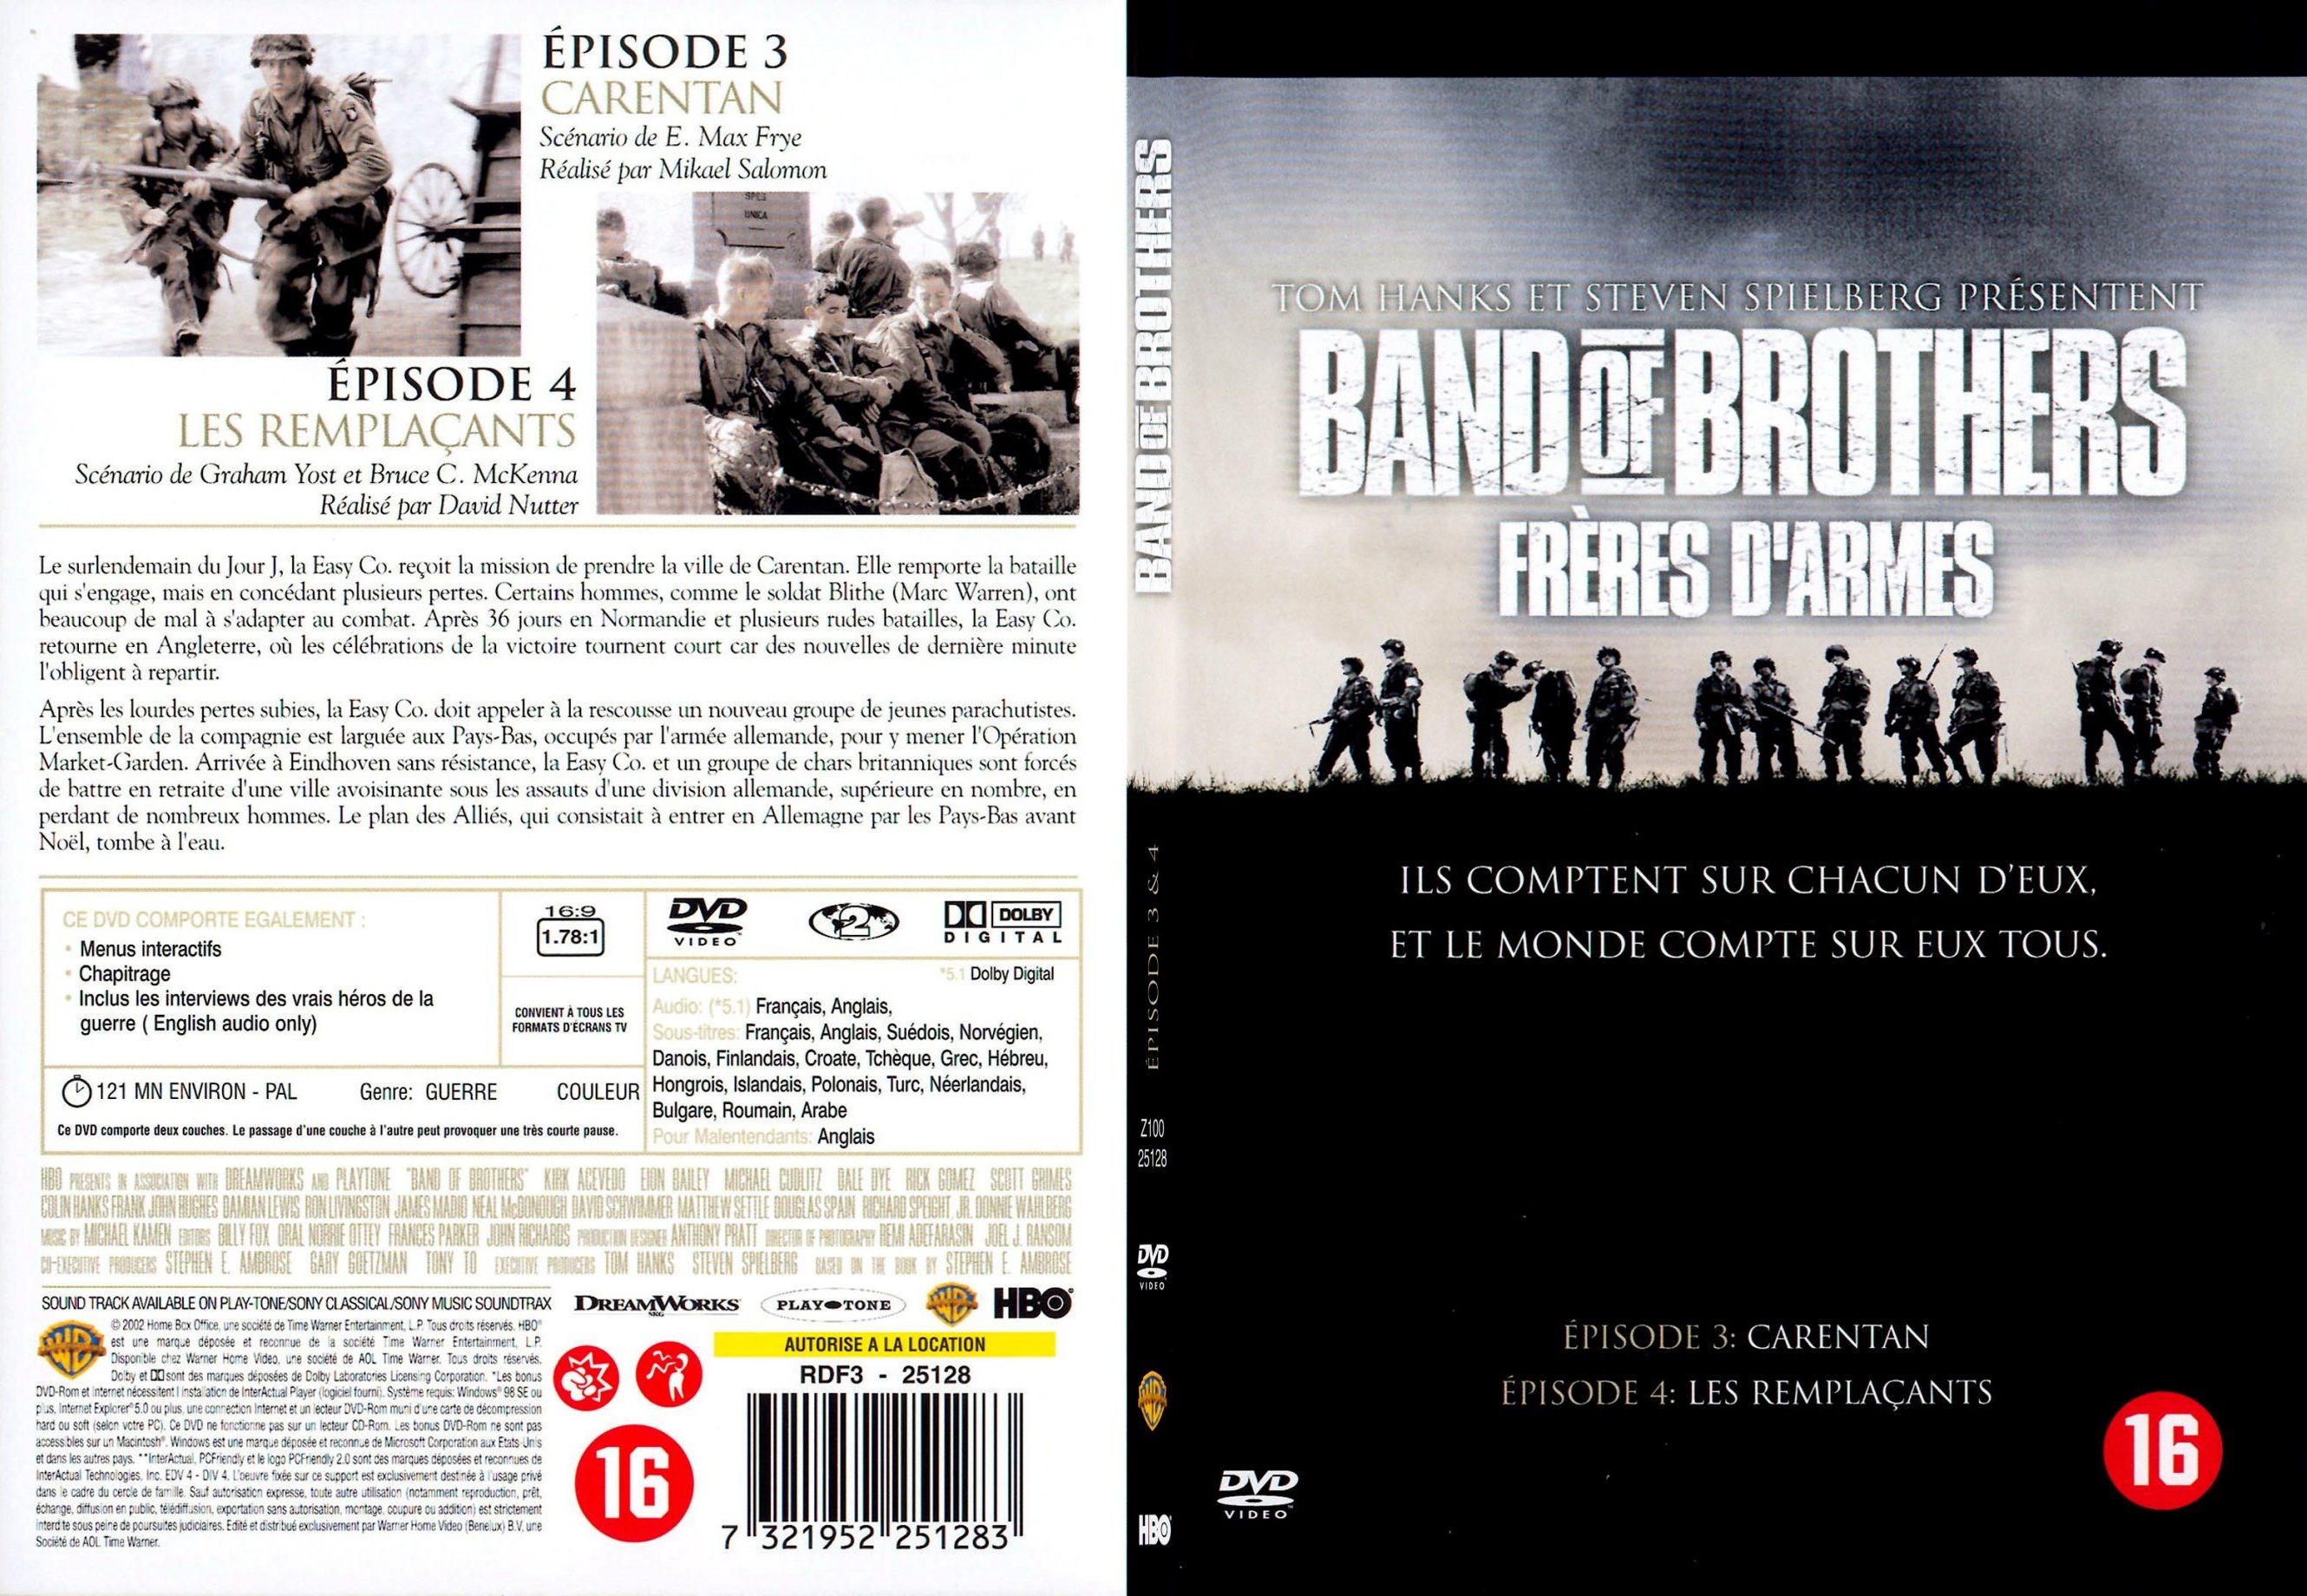 Jaquette DVD Band of brothers vol 2 - SLIM